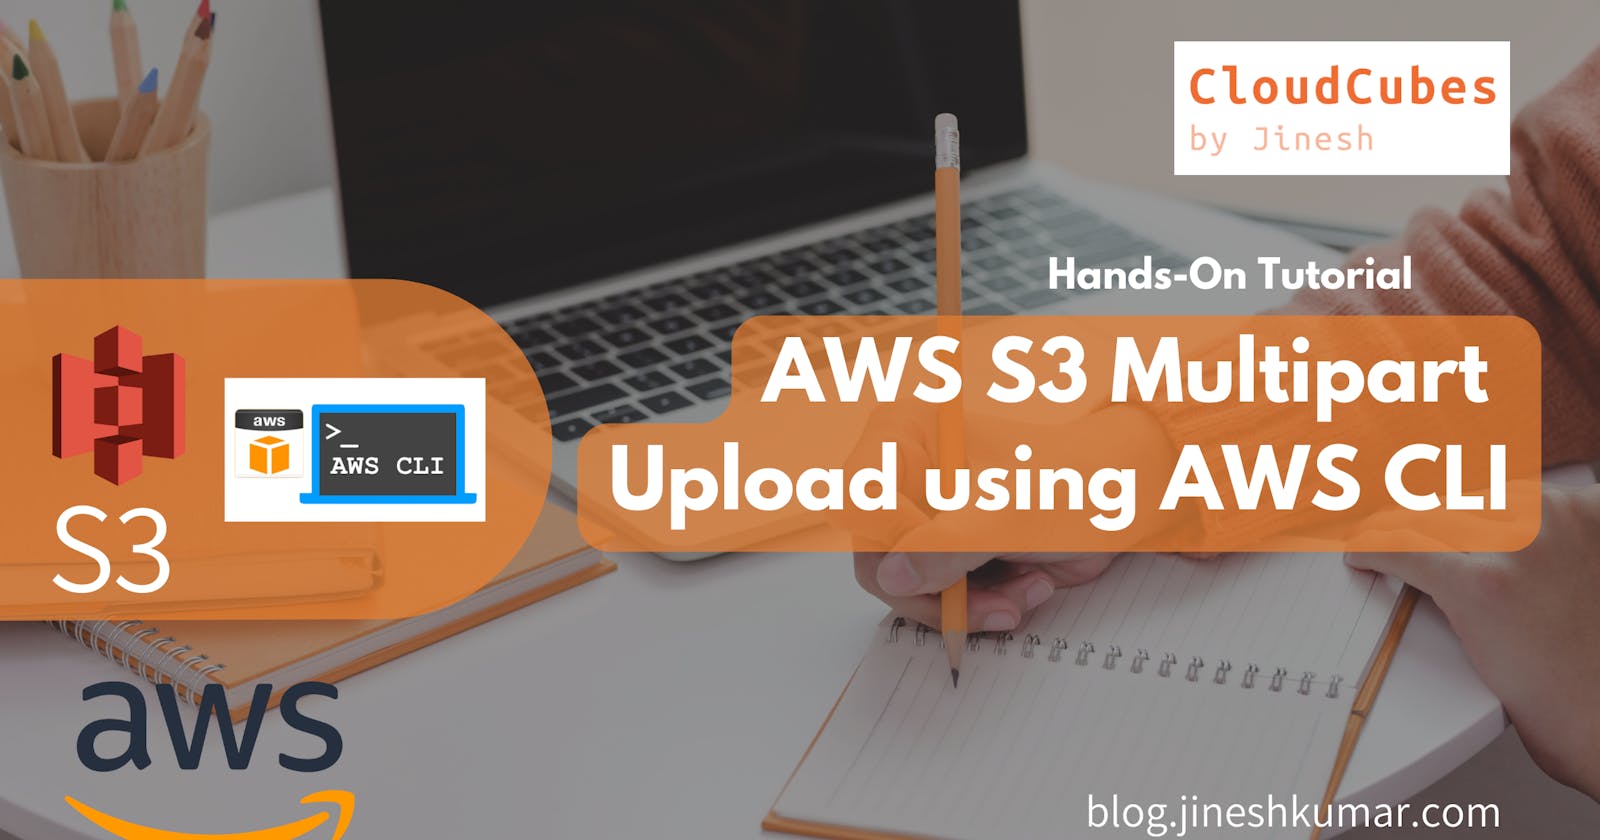 AWS S3 Multipart Upload using AWS CLI